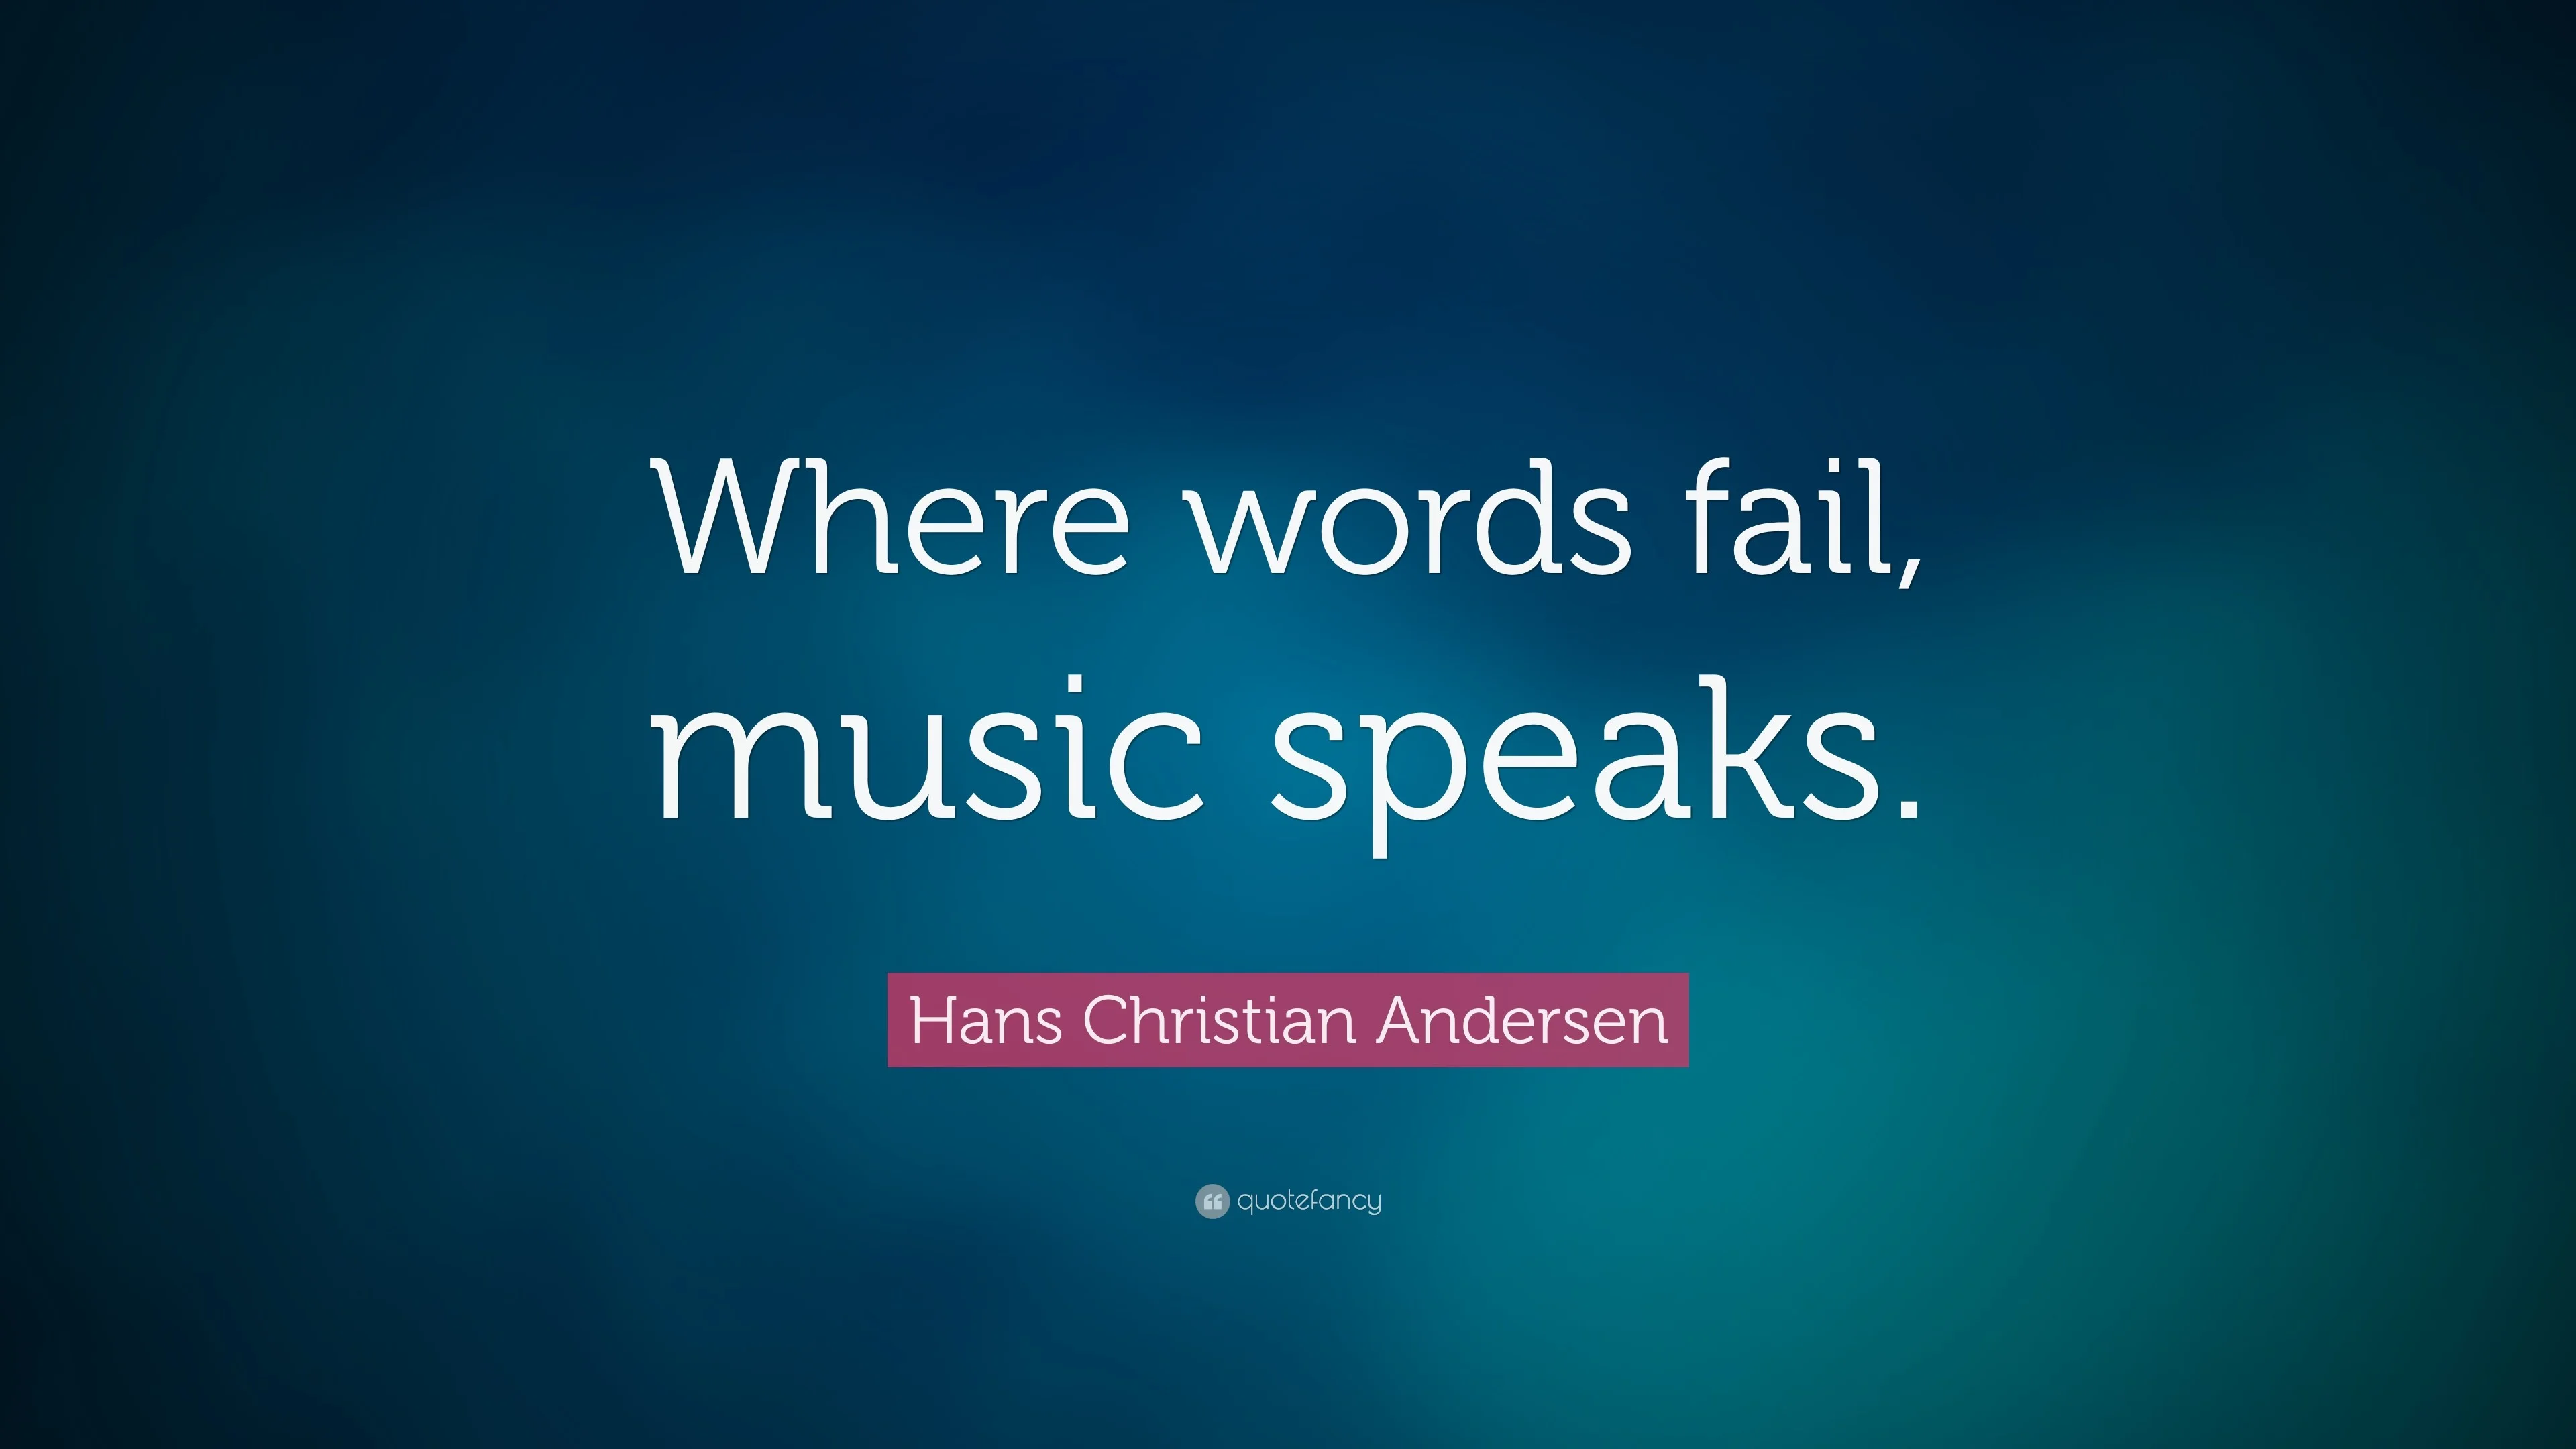 Hans Christian Andersen Quote: “Where words fail, music speaks.”